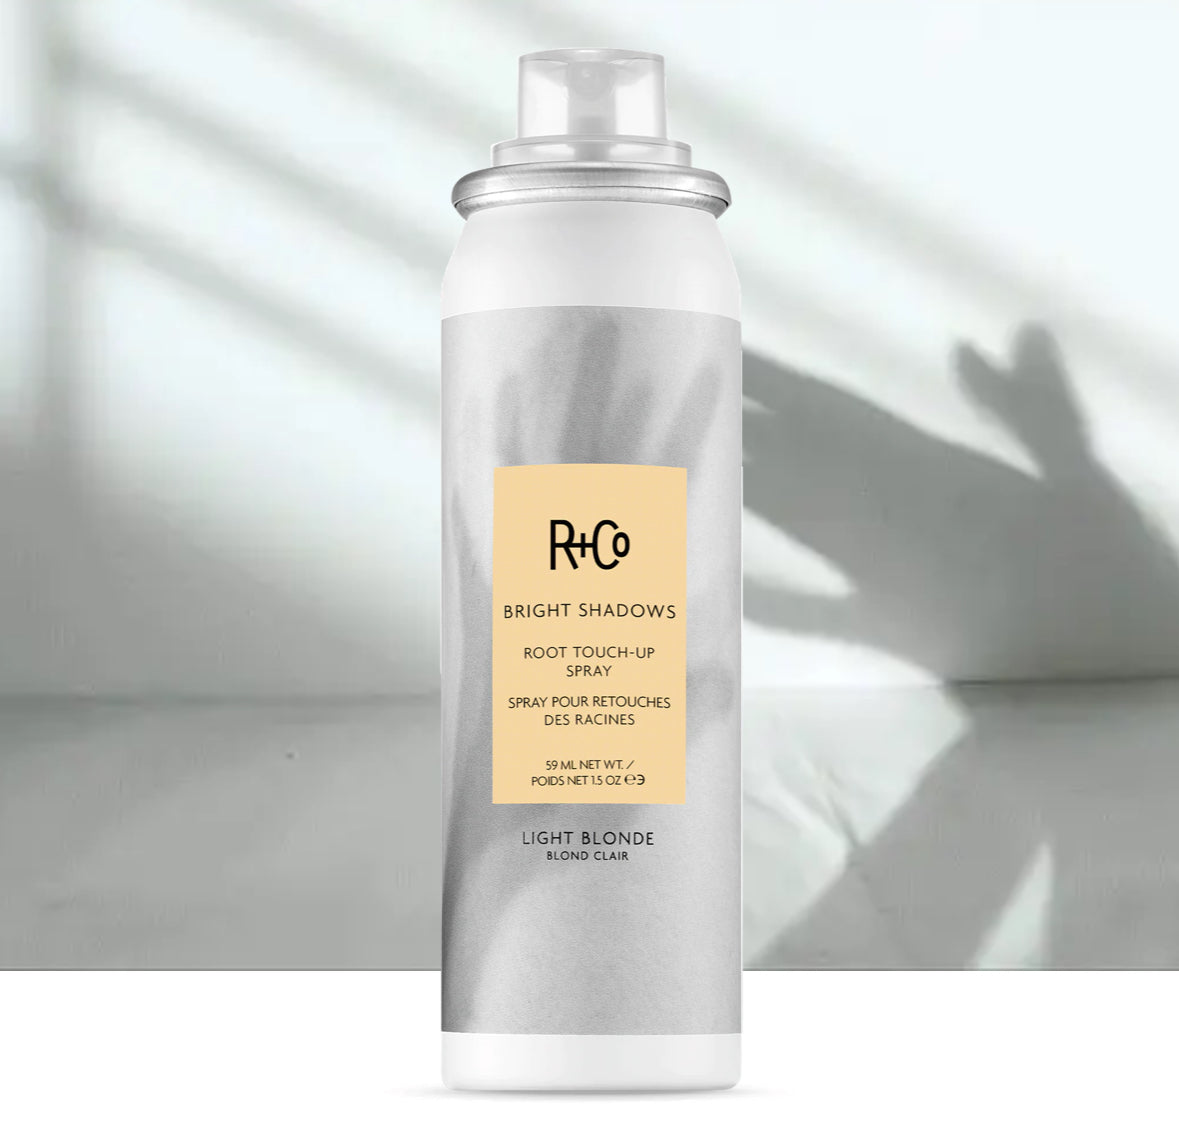 R+Co Bright Shadows Root Touch-up Spray - light blonde